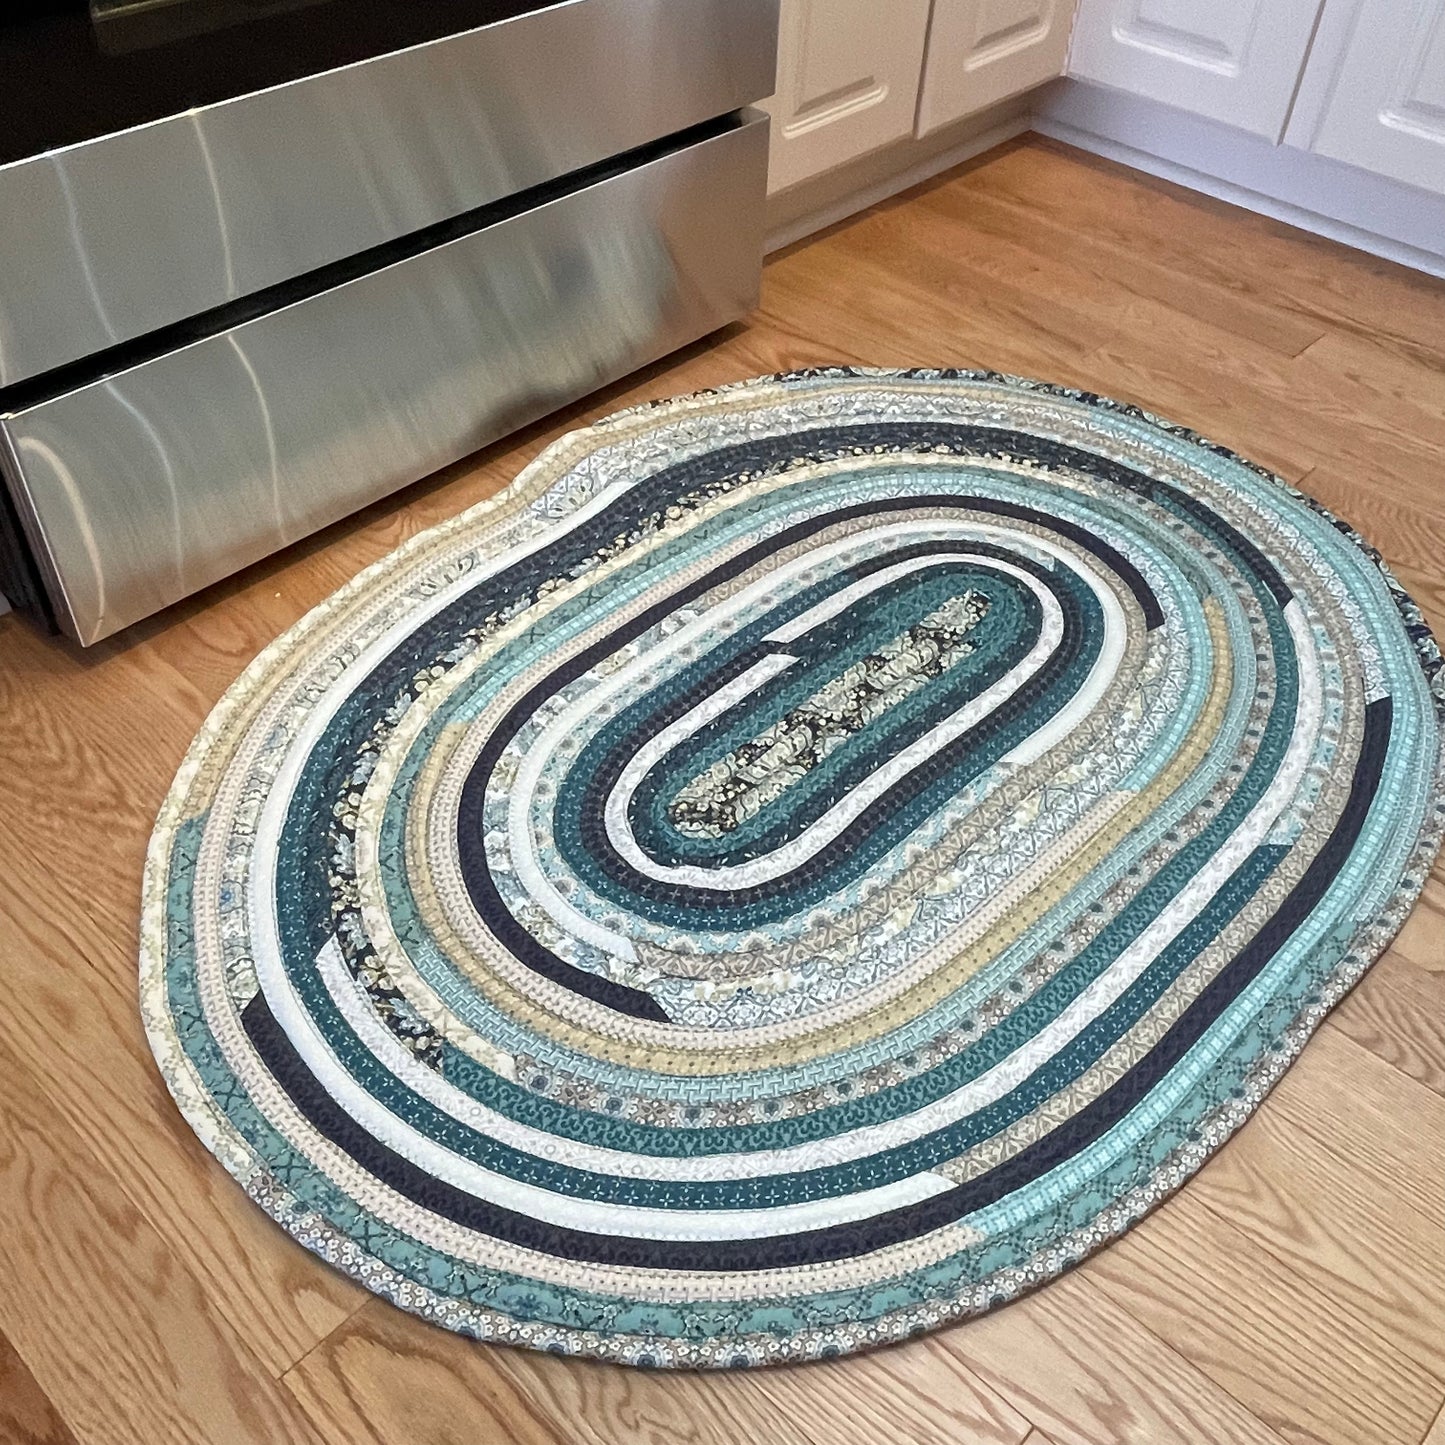 Green Handmade Kitchen Accent Rug For Bathroom or Bedside Too!